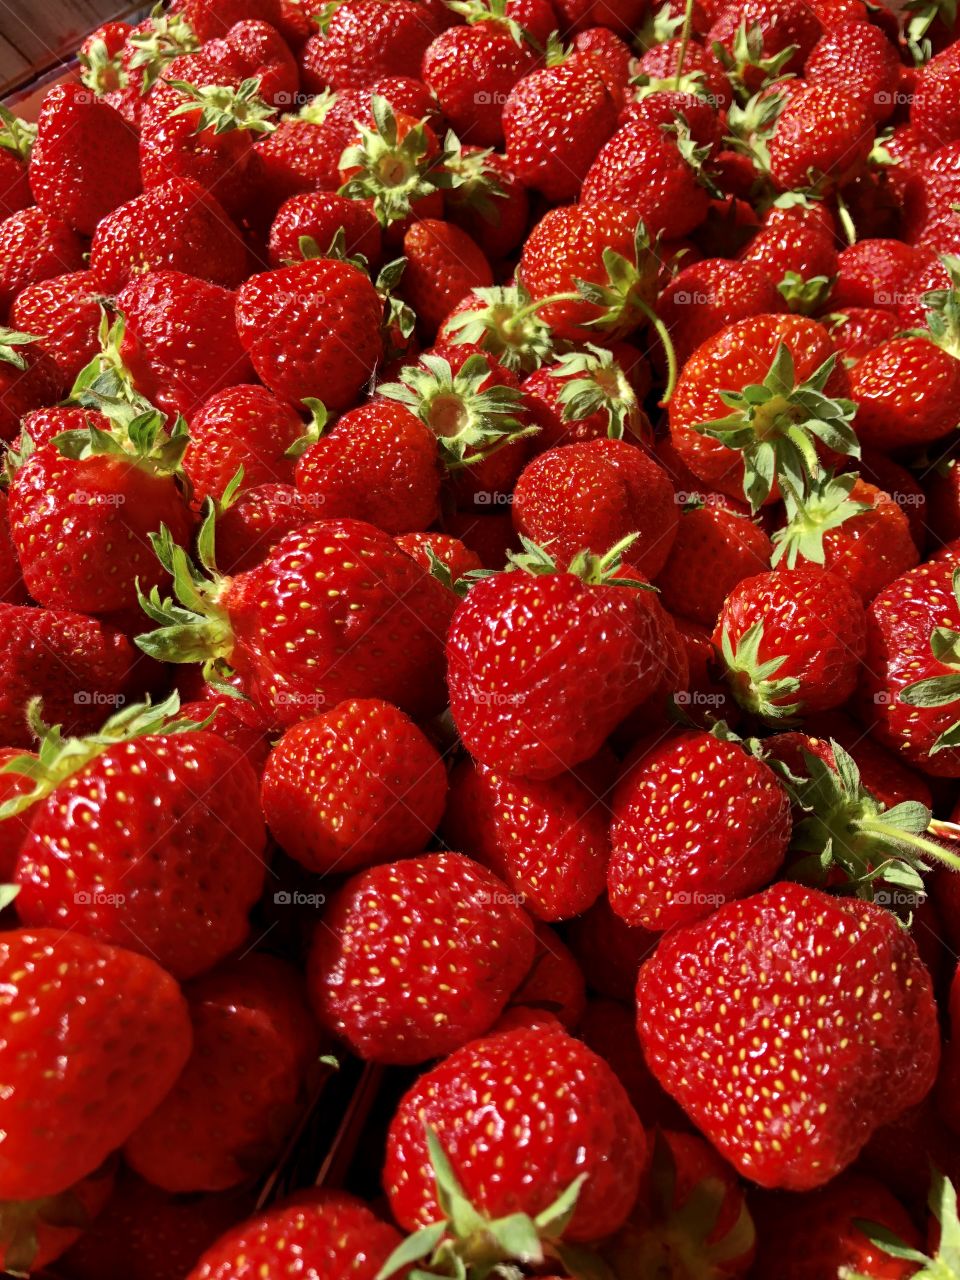 June is the peak month for Swedish strawberries 🍓